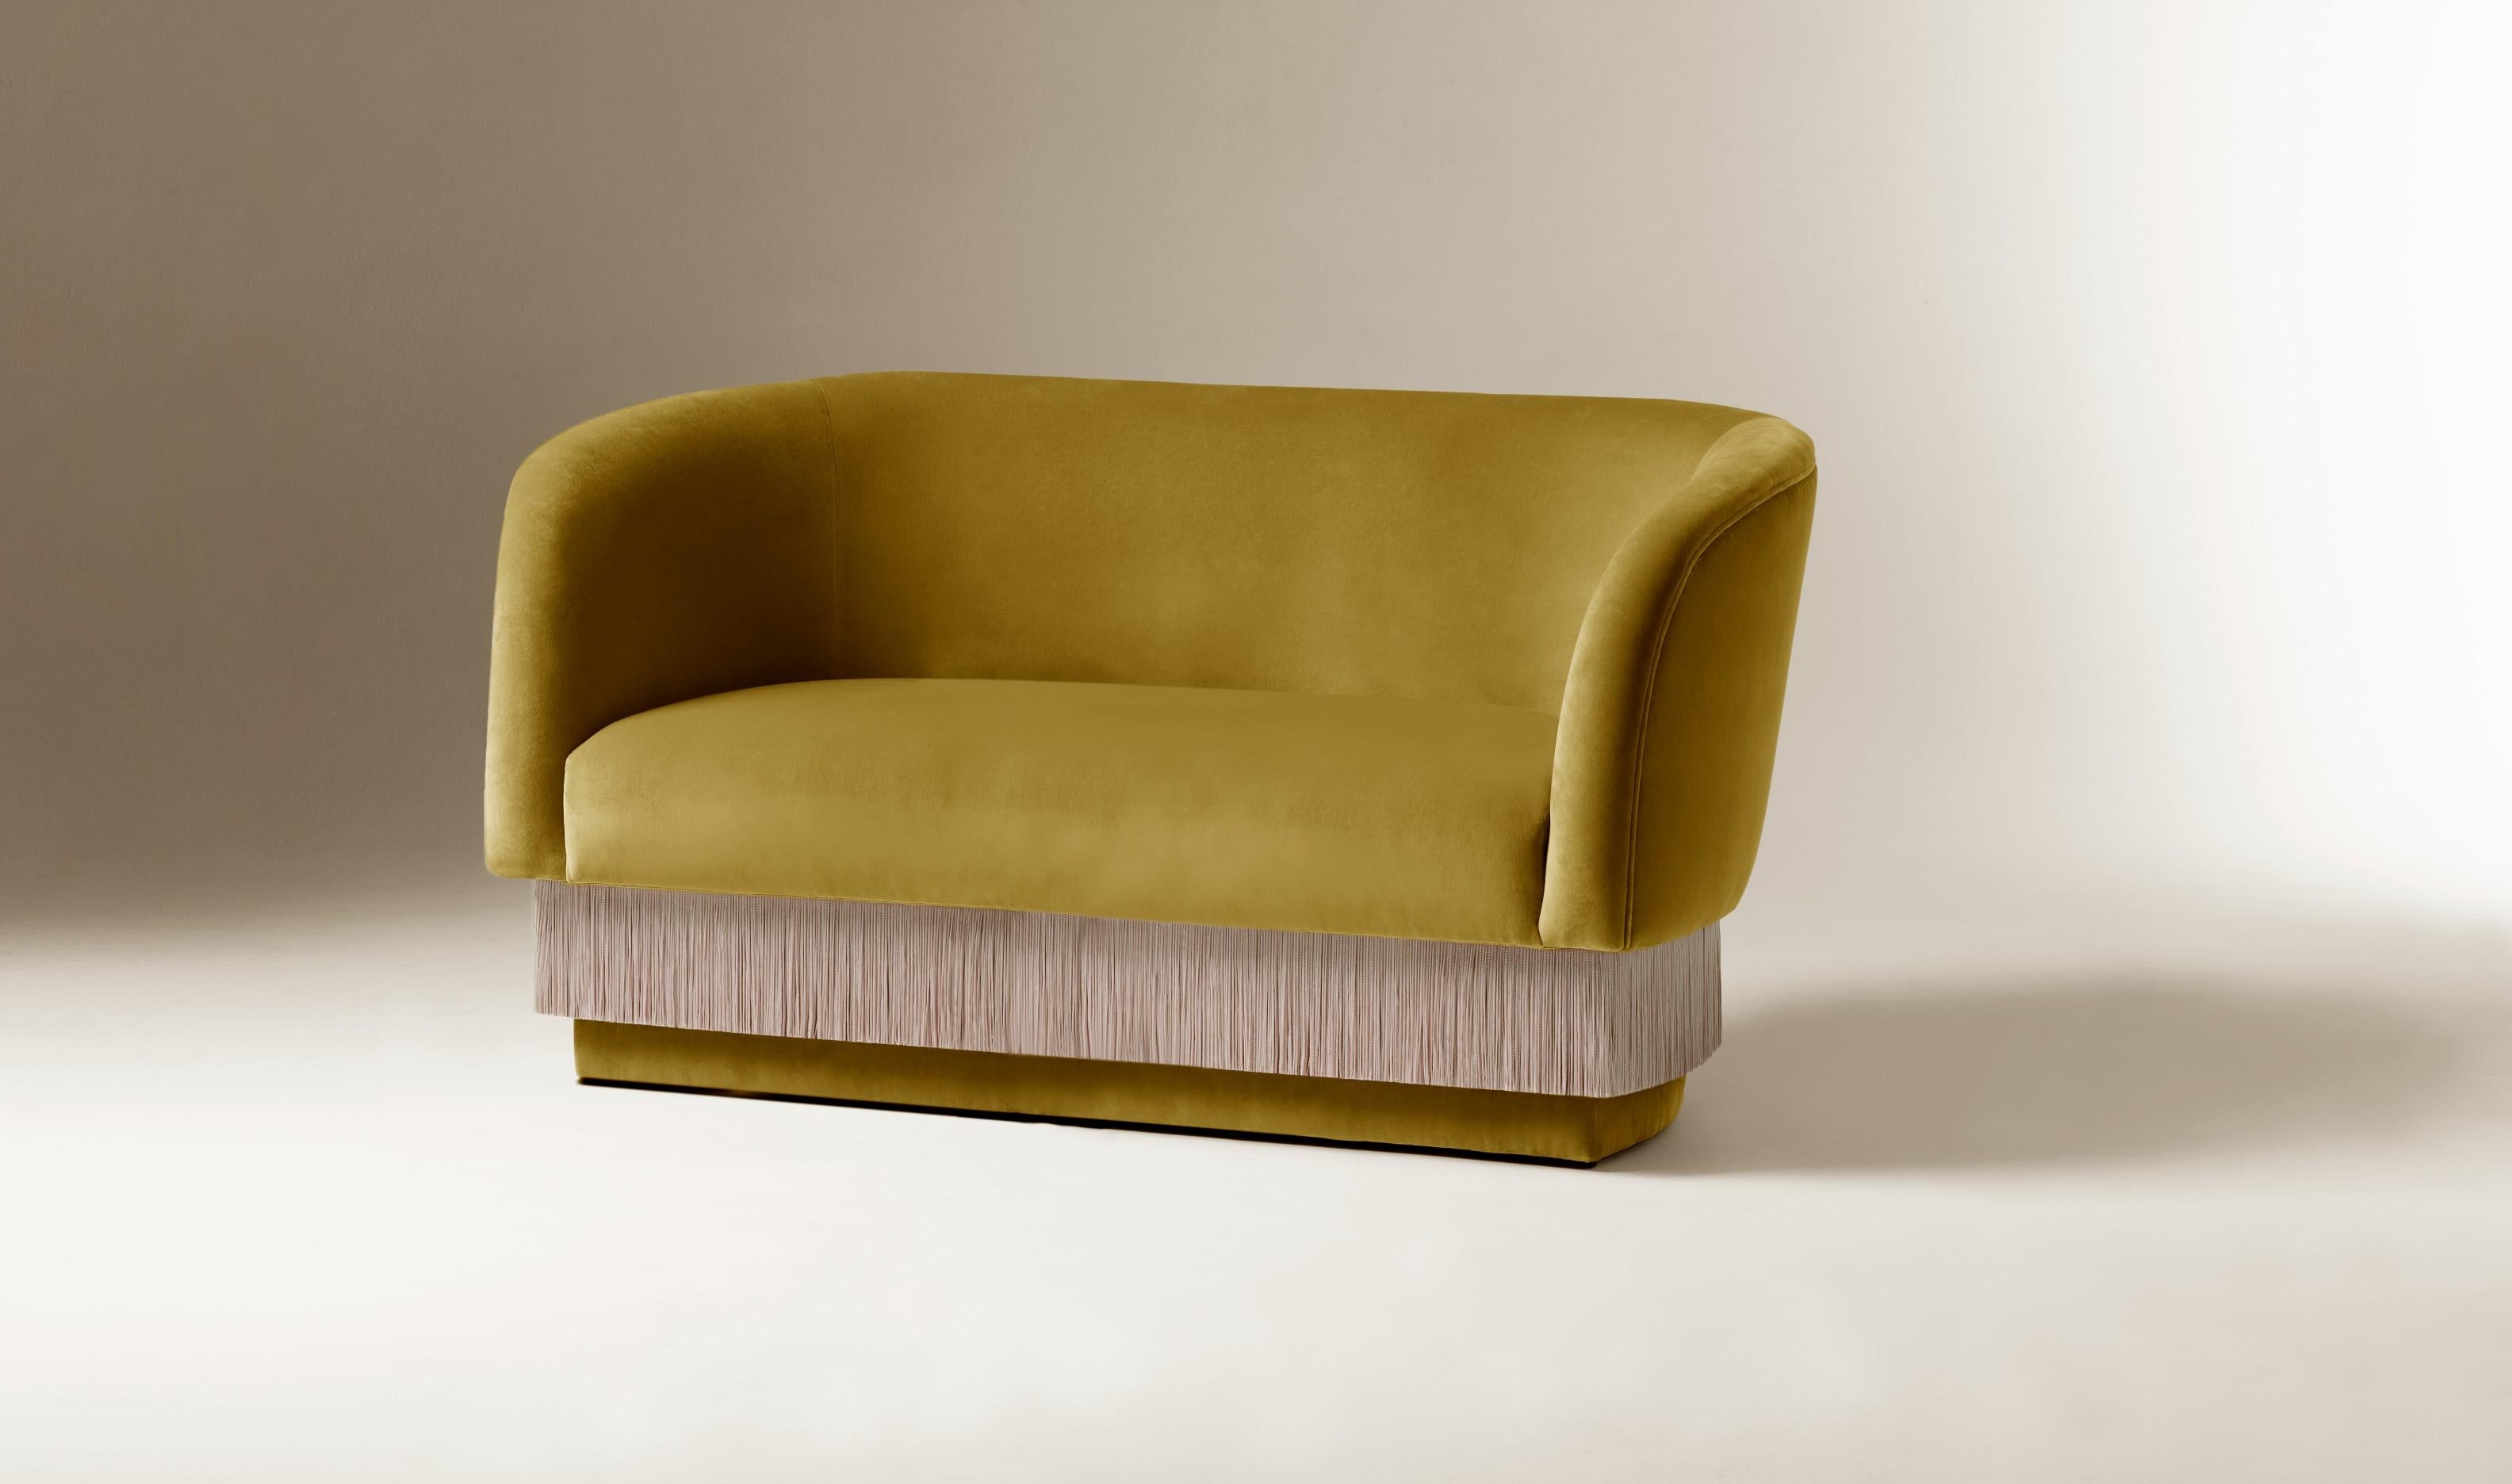 Folie sofa by Dooq
W 180 cm 55” (also available in 140cm, or made to order in other dimensions)
D 85 cm 33”
H 75 cm 30”
Seat height 42 cm 17

Materials: upholstery and piping fabric or leather, fringes.

Dooq is a design company dedicated to